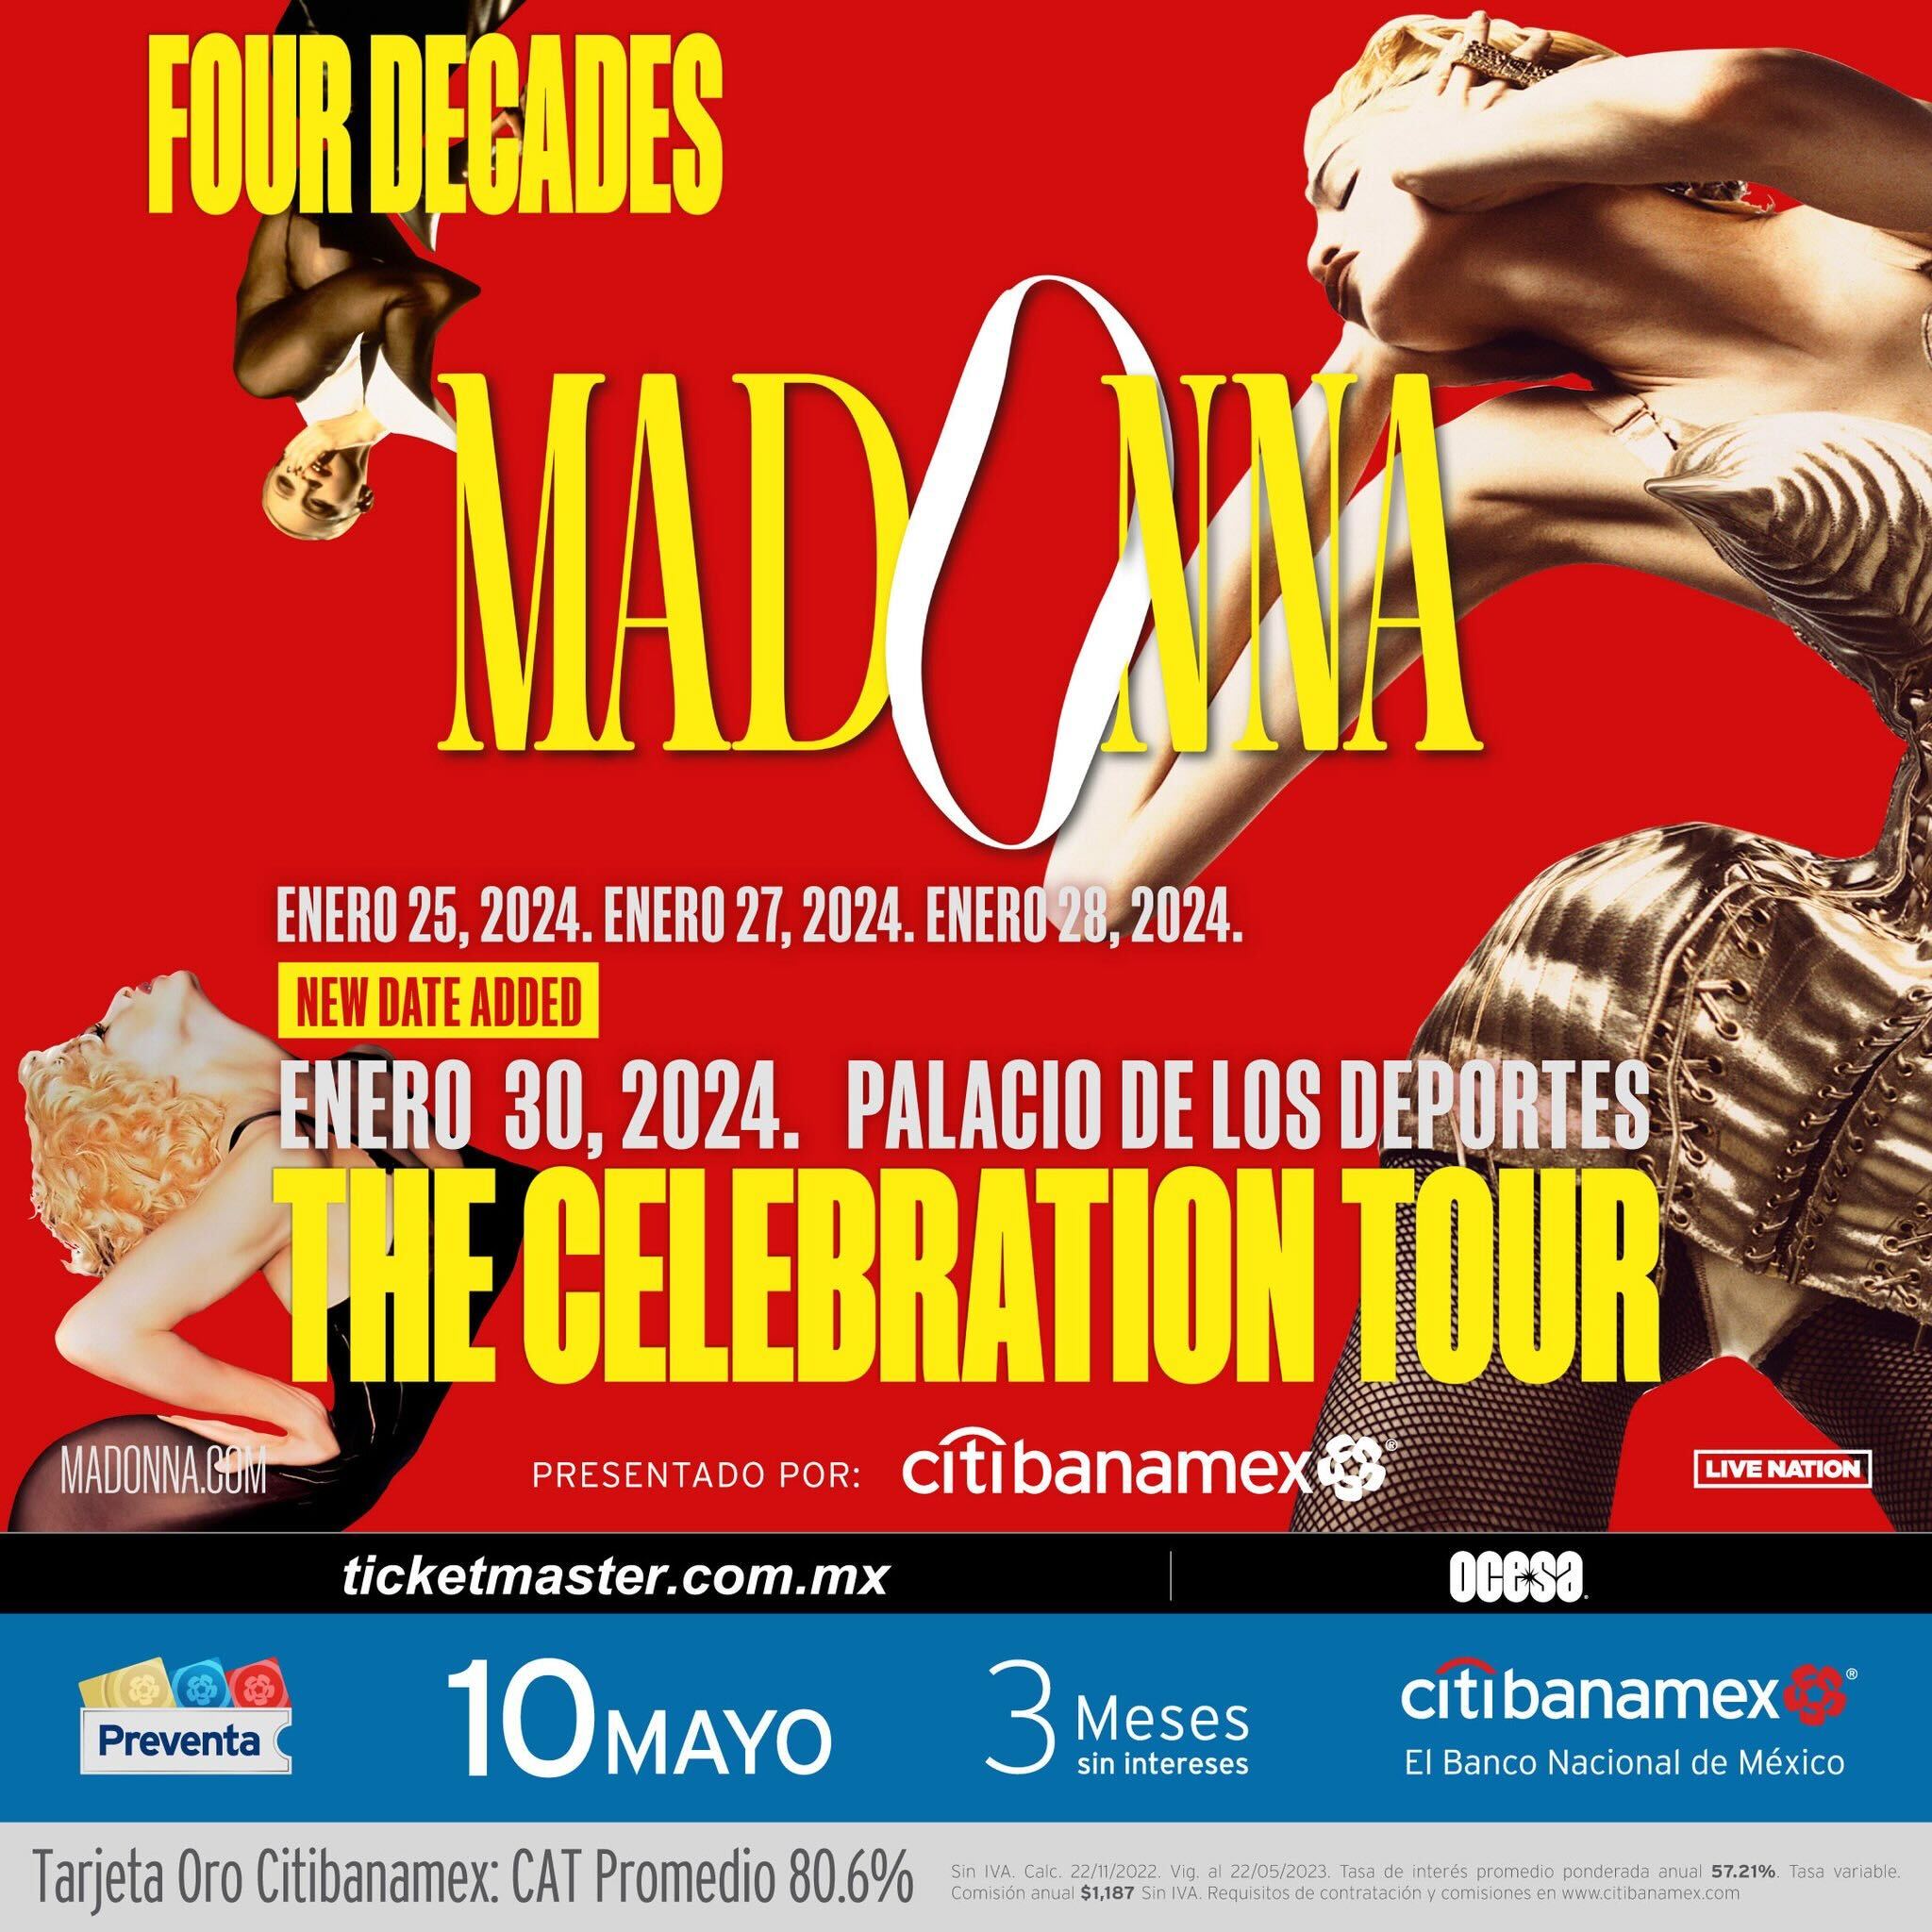 Prices, dates and everything about Madonna's concerts in Mexico for her 40-year career